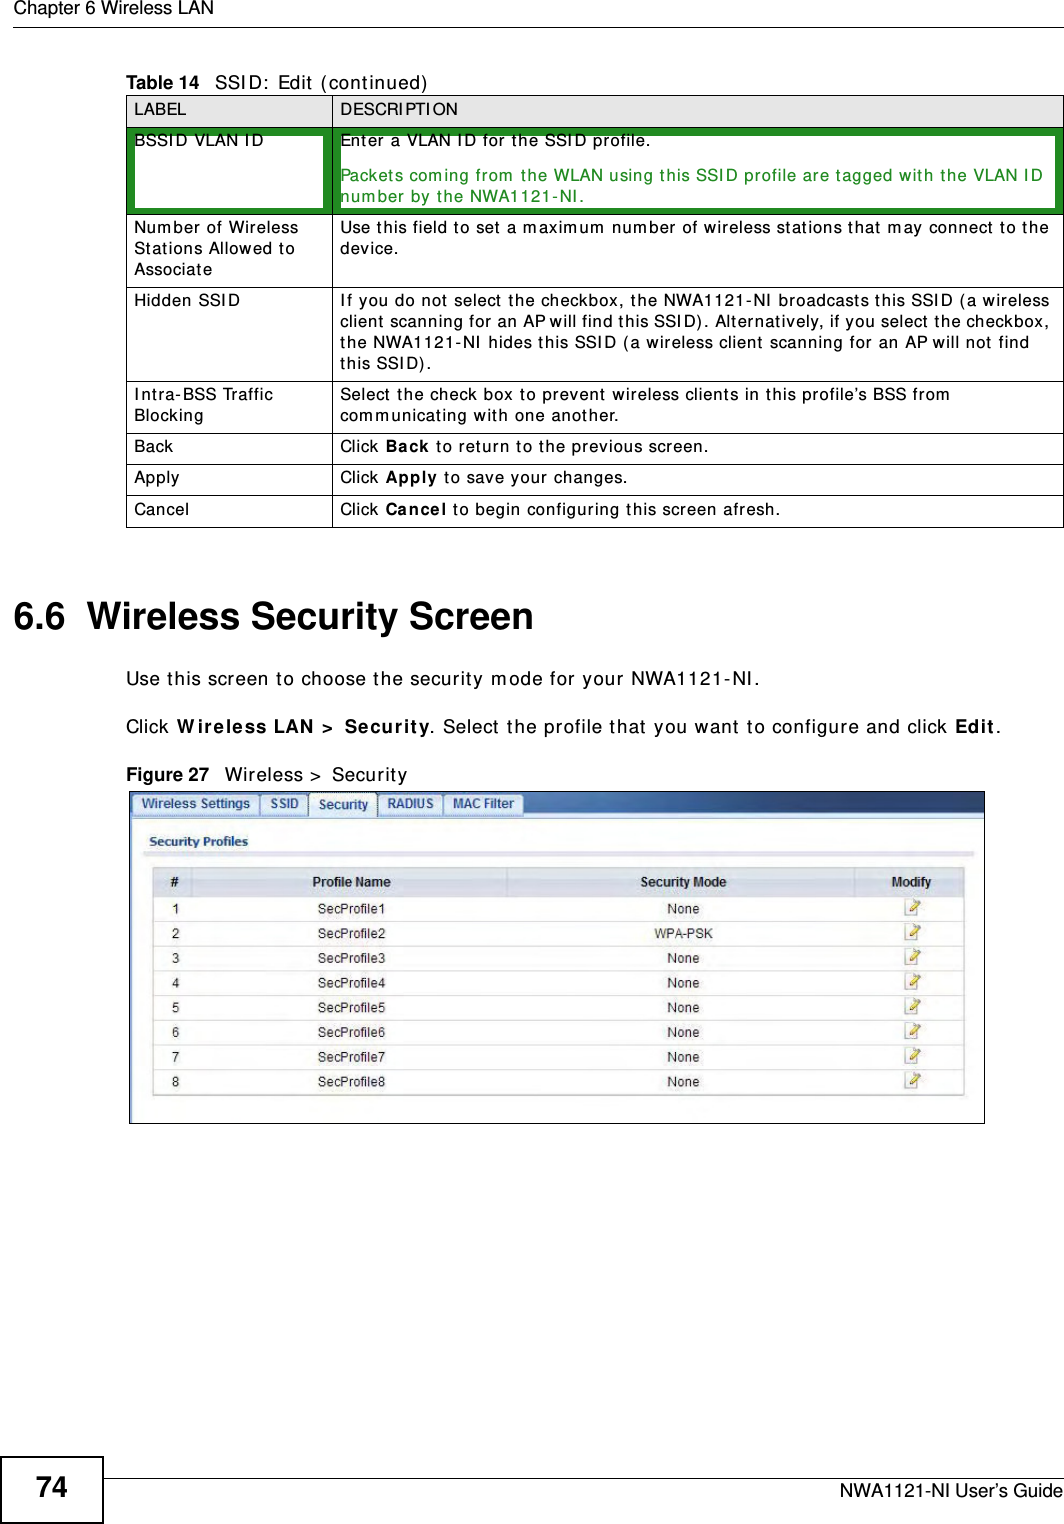 Chapter 6 Wireless LANNWA1121-NI User’s Guide746.6  Wireless Security ScreenUse this screen to choose the security mode for your NWA1121-NI. Click Wireless LAN &gt; Security. Select the profile that you want to configure and click Edit.Figure 27   Wireless &gt; SecurityBSSID VLAN ID Enter a VLAN ID for the SSID profile.Packets coming from the WLAN using this SSID profile are tagged with the VLAN ID number by the NWA1121-NI. Number of Wireless Stations Allowed to AssociateUse this field to set a maximum number of wireless stations that may connect to the device.Hidden SSID If you do not select the checkbox, the NWA1121-NI broadcasts this SSID (a wireless client scanning for an AP will find this SSID). Alternatively, if you select the checkbox, the NWA1121-NI hides this SSID (a wireless client scanning for an AP will not find this SSID).Intra-BSS Traffic Blocking Select the check box to prevent wireless clients in this profile’s BSS from communicating with one another.Back Click Back to return to the previous screen.Apply Click Apply to save your changes.Cancel Click Cancel to begin configuring this screen afresh.Table 14   SSID: Edit (continued)LABEL DESCRIPTION